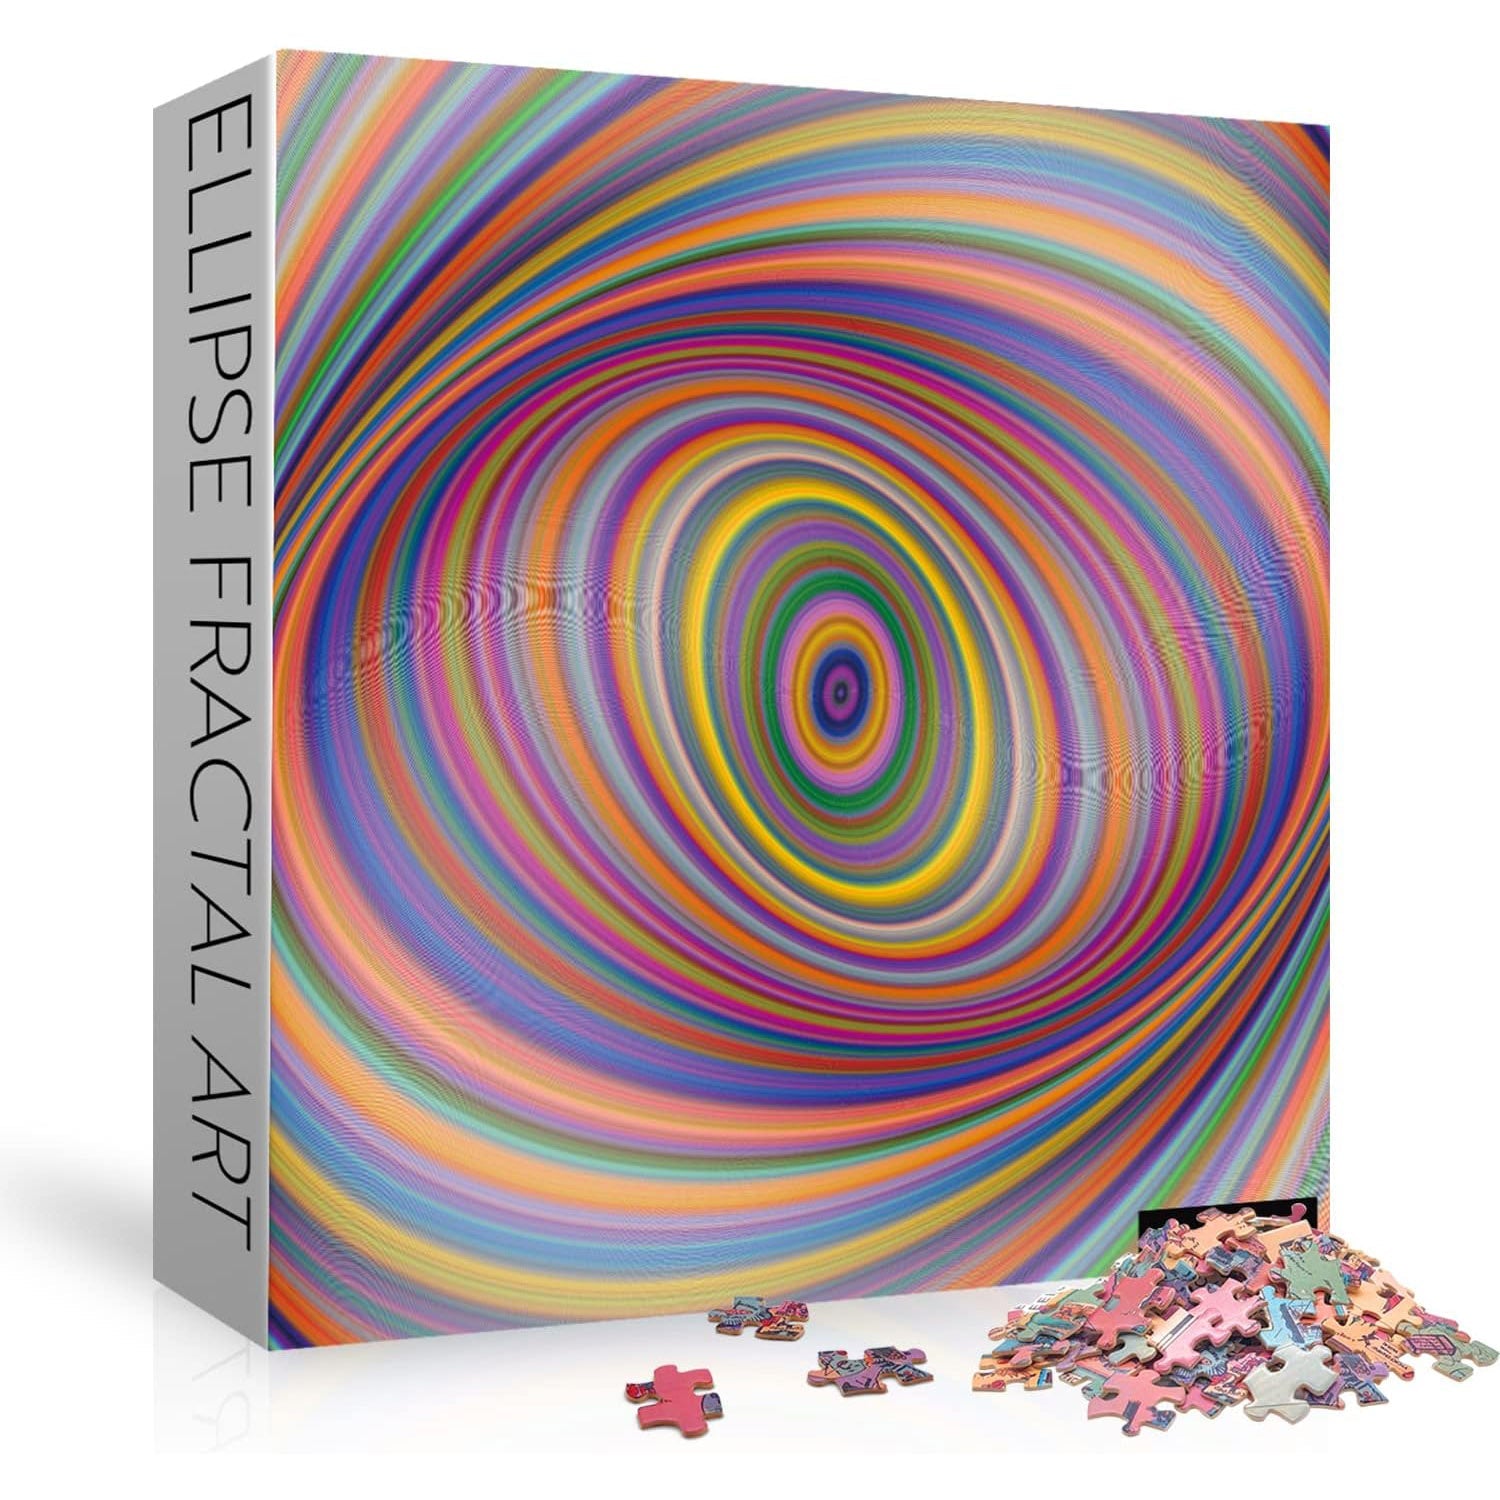 Multicolored Hard Jigsaw Puzzle 1000 Pieces